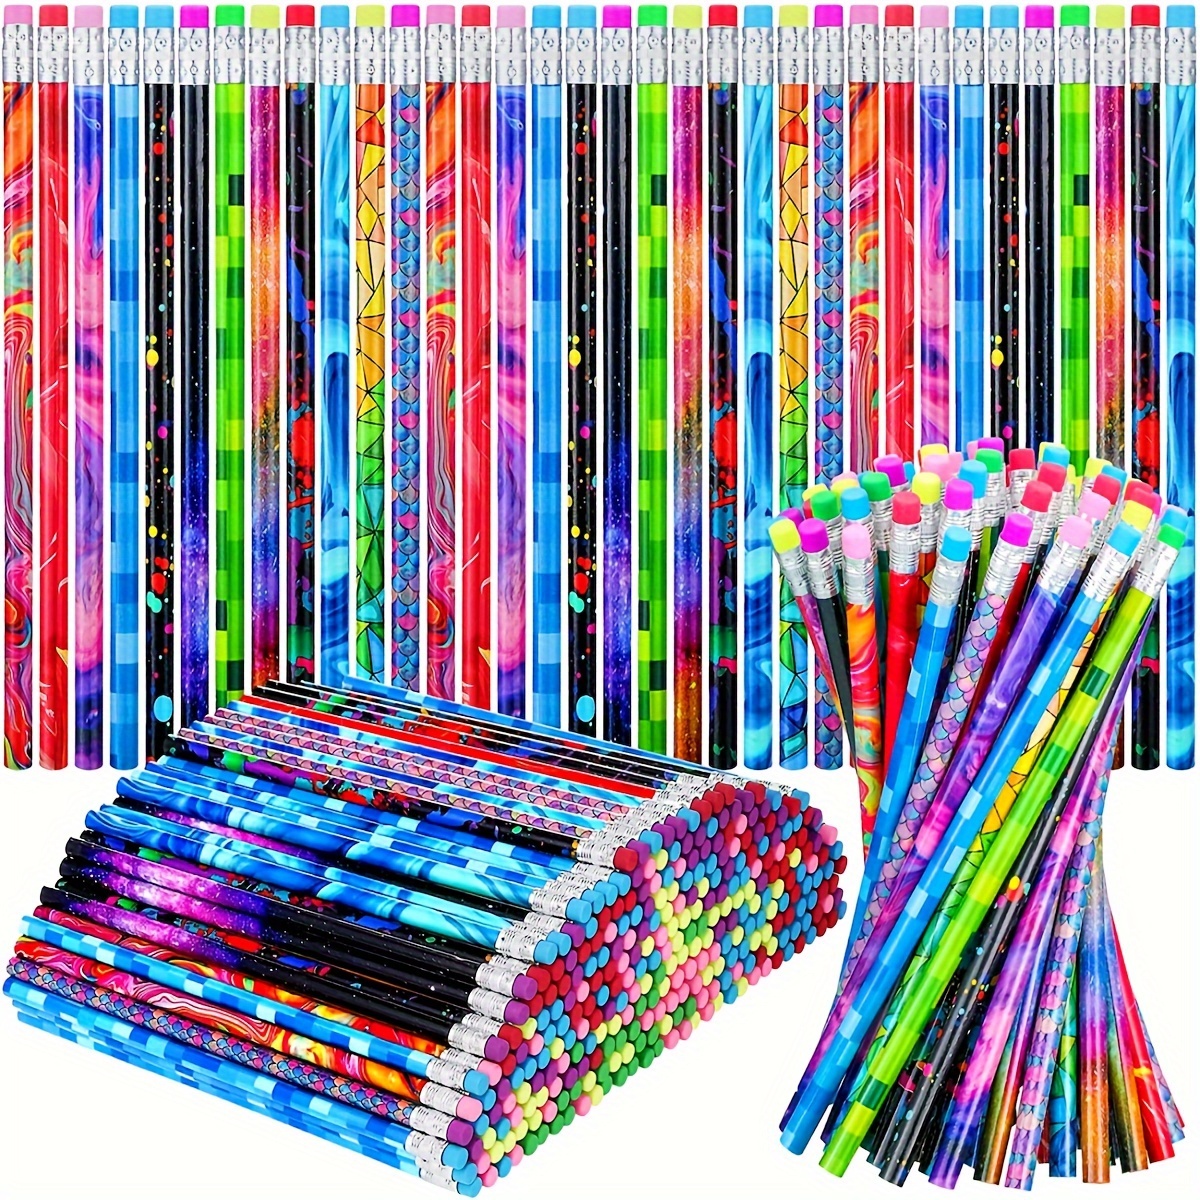 

20pcs/50pcs/100pcs Cute Cartoon Hb Pencils With Eraser Tip, Pencils For Writing Drawing Sketching Stationery Prize Gift